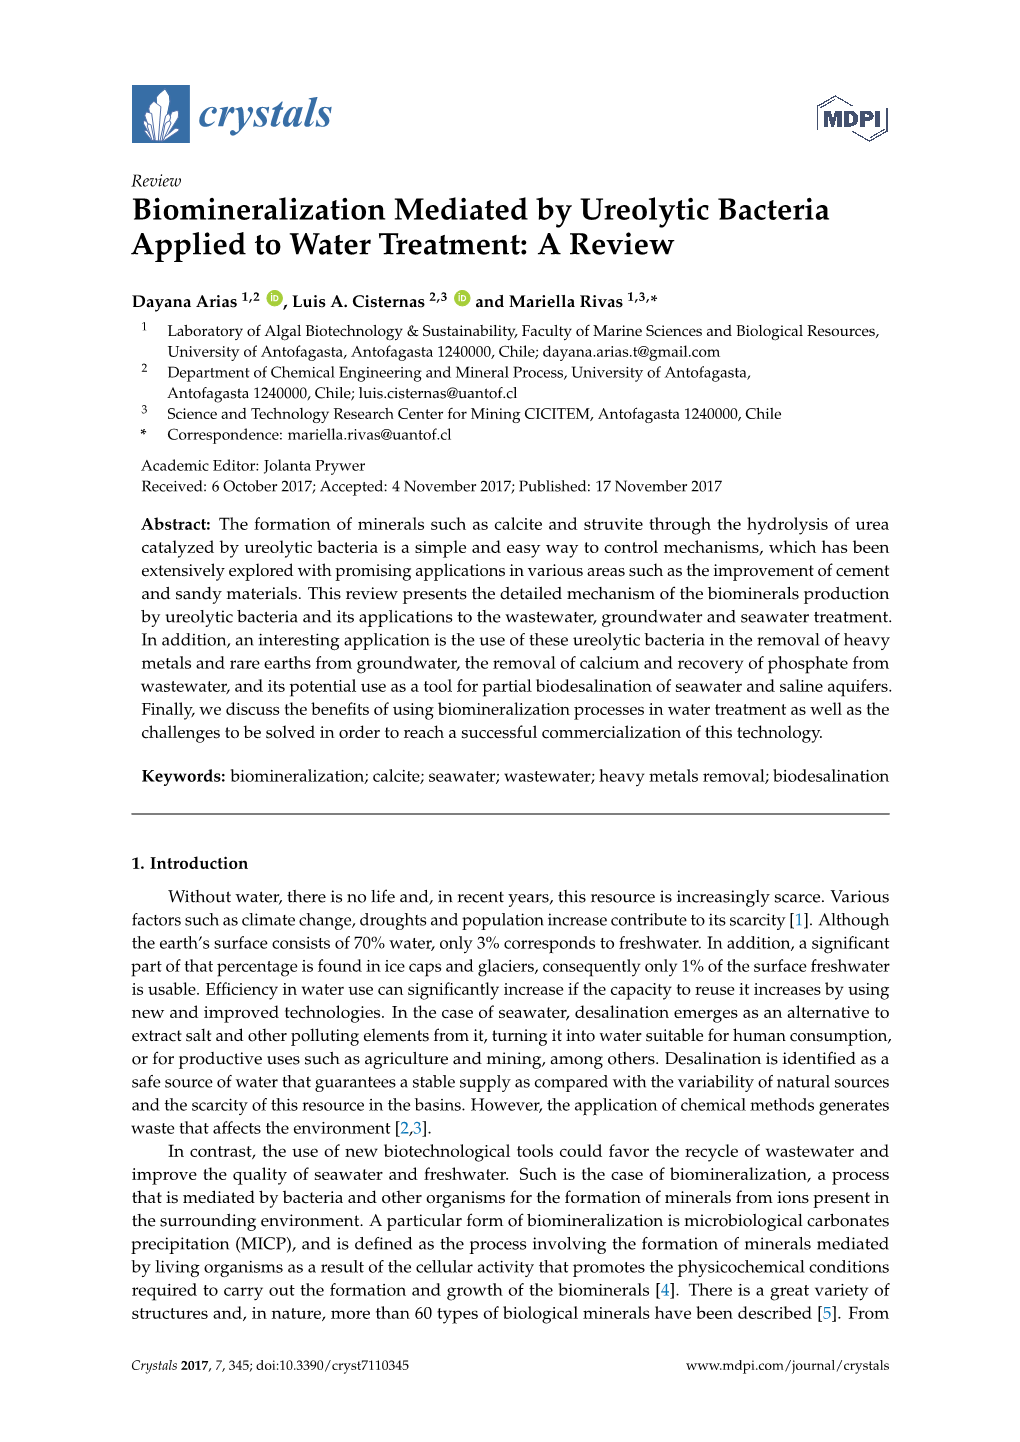 Biomineralization Mediated by Ureolytic Bacteria Applied to Water Treatment: a Review